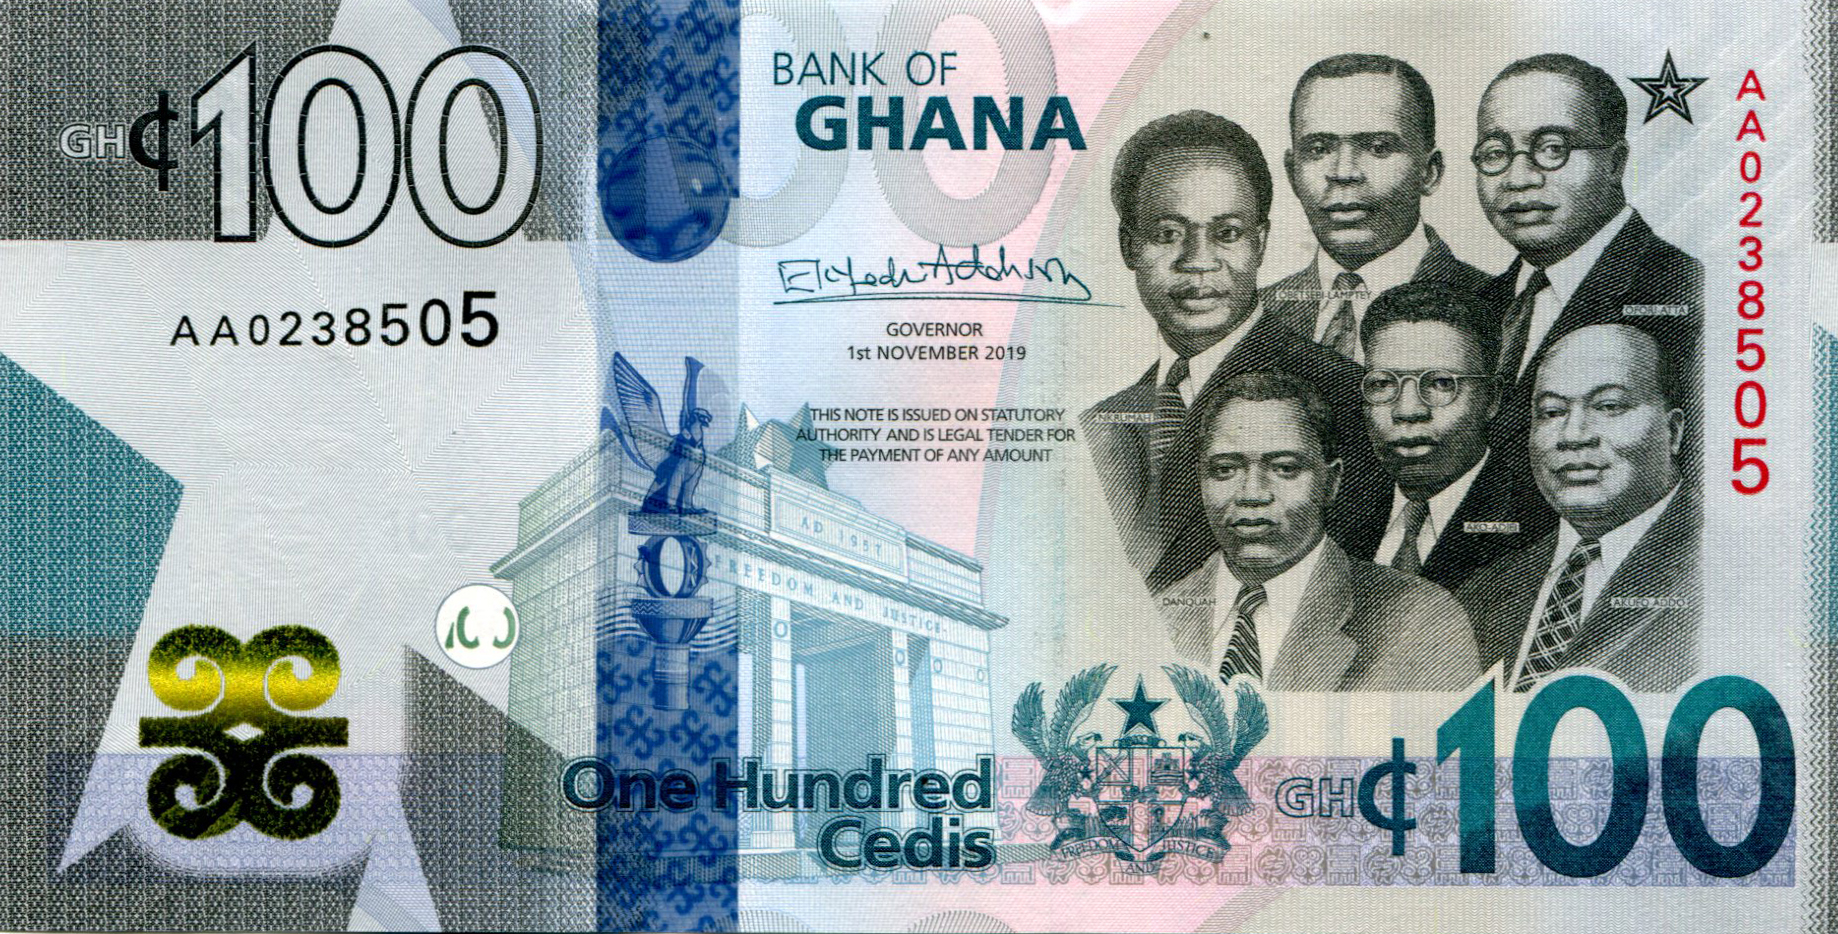 What Business Can I Start With 2000 Ghana Cedis